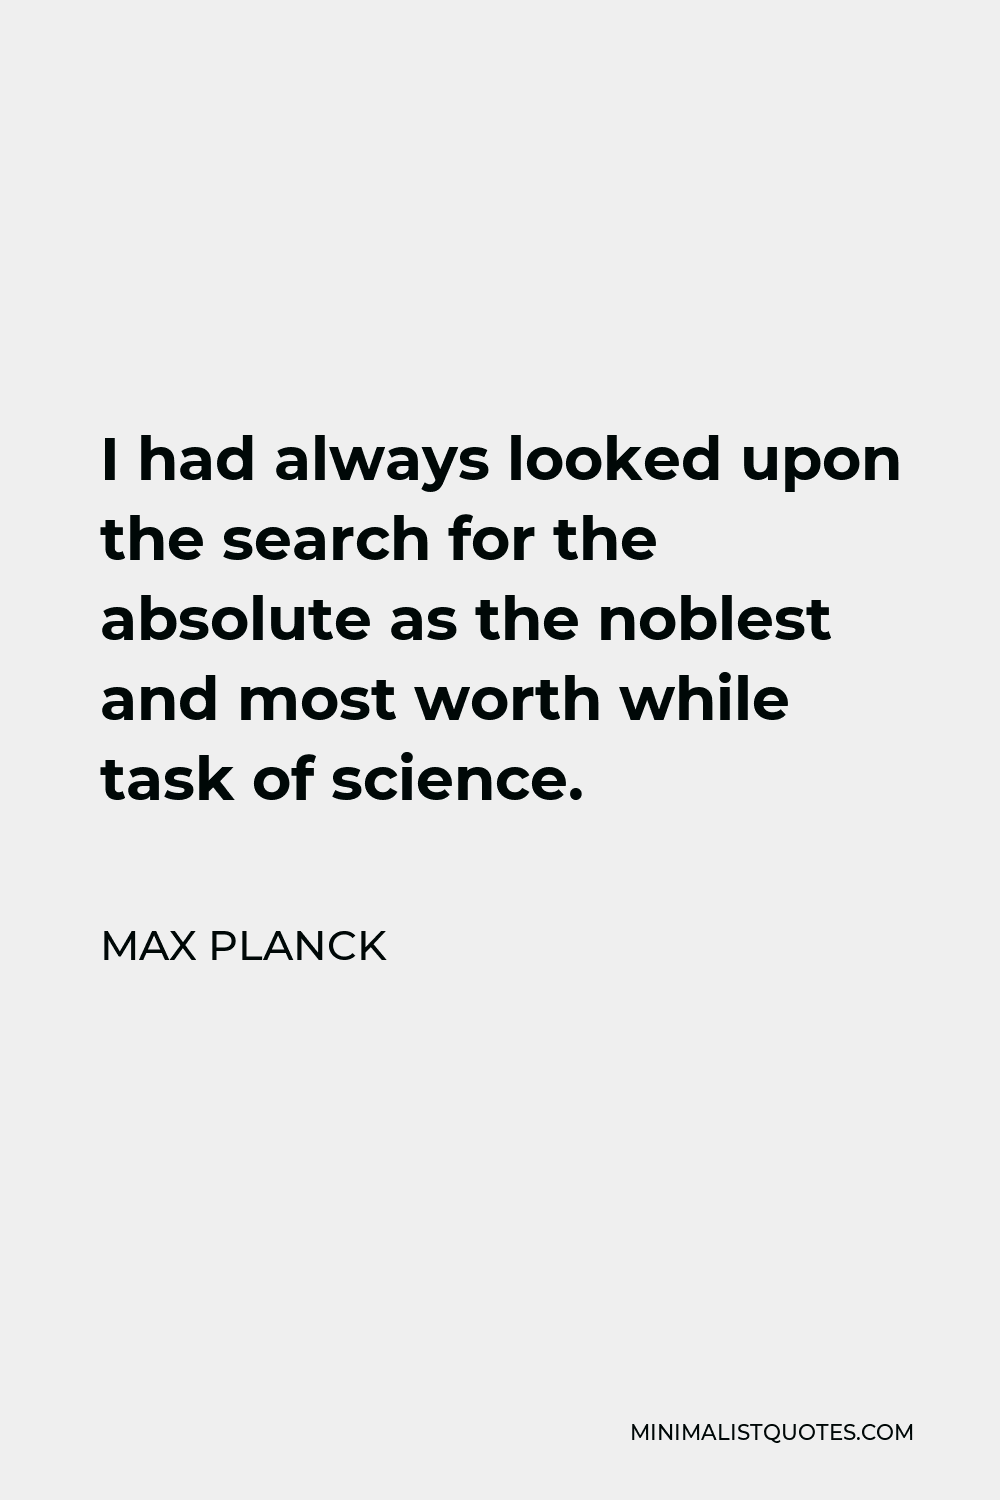 Max Planck Quote - I had always looked upon the search for the absolute as the noblest and most worth while task of science.